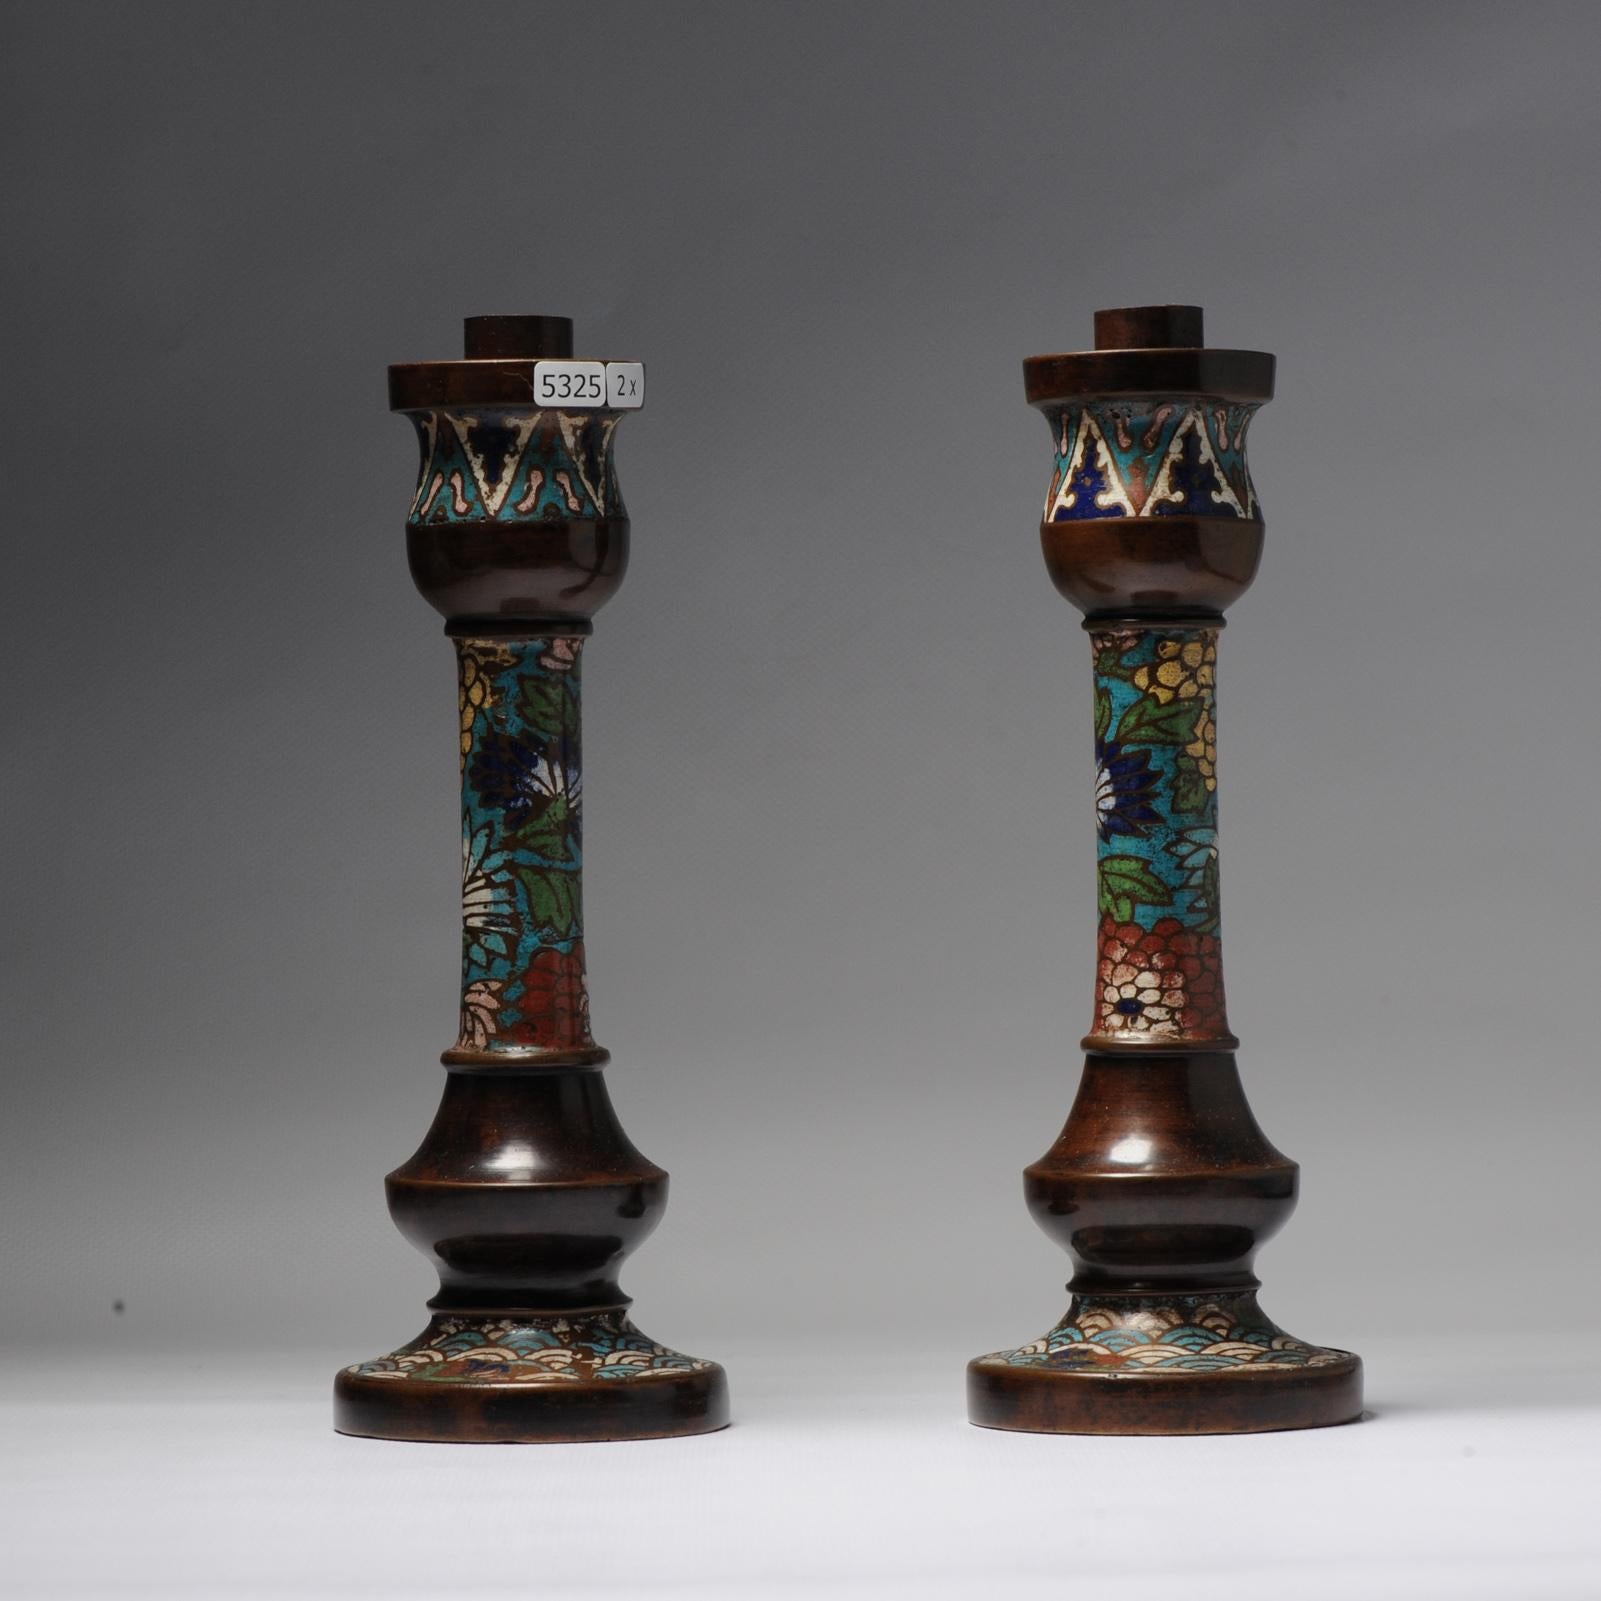 Lovely 20c Antique Meiji/Taisho Period Japanese Candle Sticks Bronze Cloisonne In Fair Condition In Amsterdam, Noord Holland